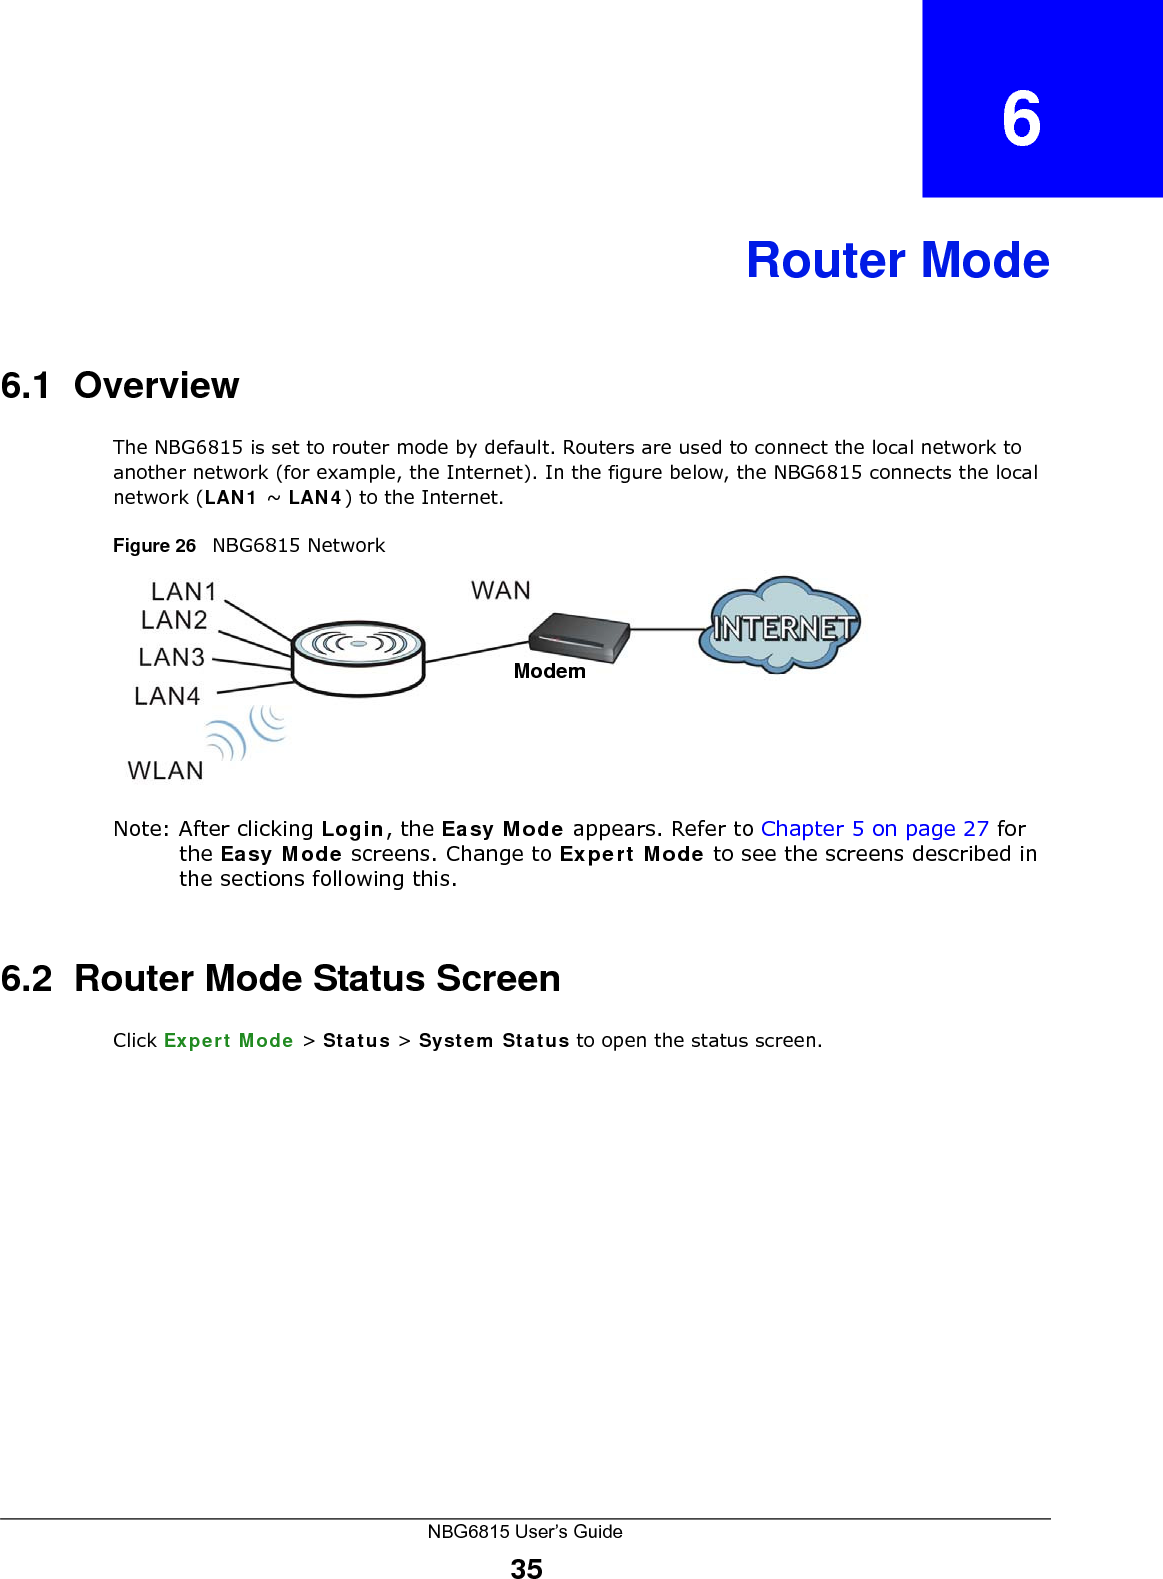 NBG6815 User’s Guide35CHAPTER   6Router Mode6.1  OverviewThe NBG6815 is set to router mode by default. Routers are used to connect the local network to another network (for example, the Internet). In the figure below, the NBG6815 connects the local network (LAN1 ~ LAN4) to the Internet.Figure 26   NBG6815 NetworkNote: After clicking Login, the Easy Mode appears. Refer to Chapter 5 on page 27 for the Easy Mode screens. Change to Expert Mode to see the screens described in the sections following this.6.2  Router Mode Status ScreenClick Expert Mode &gt; Status &gt; System Status to open the status screen. Modem